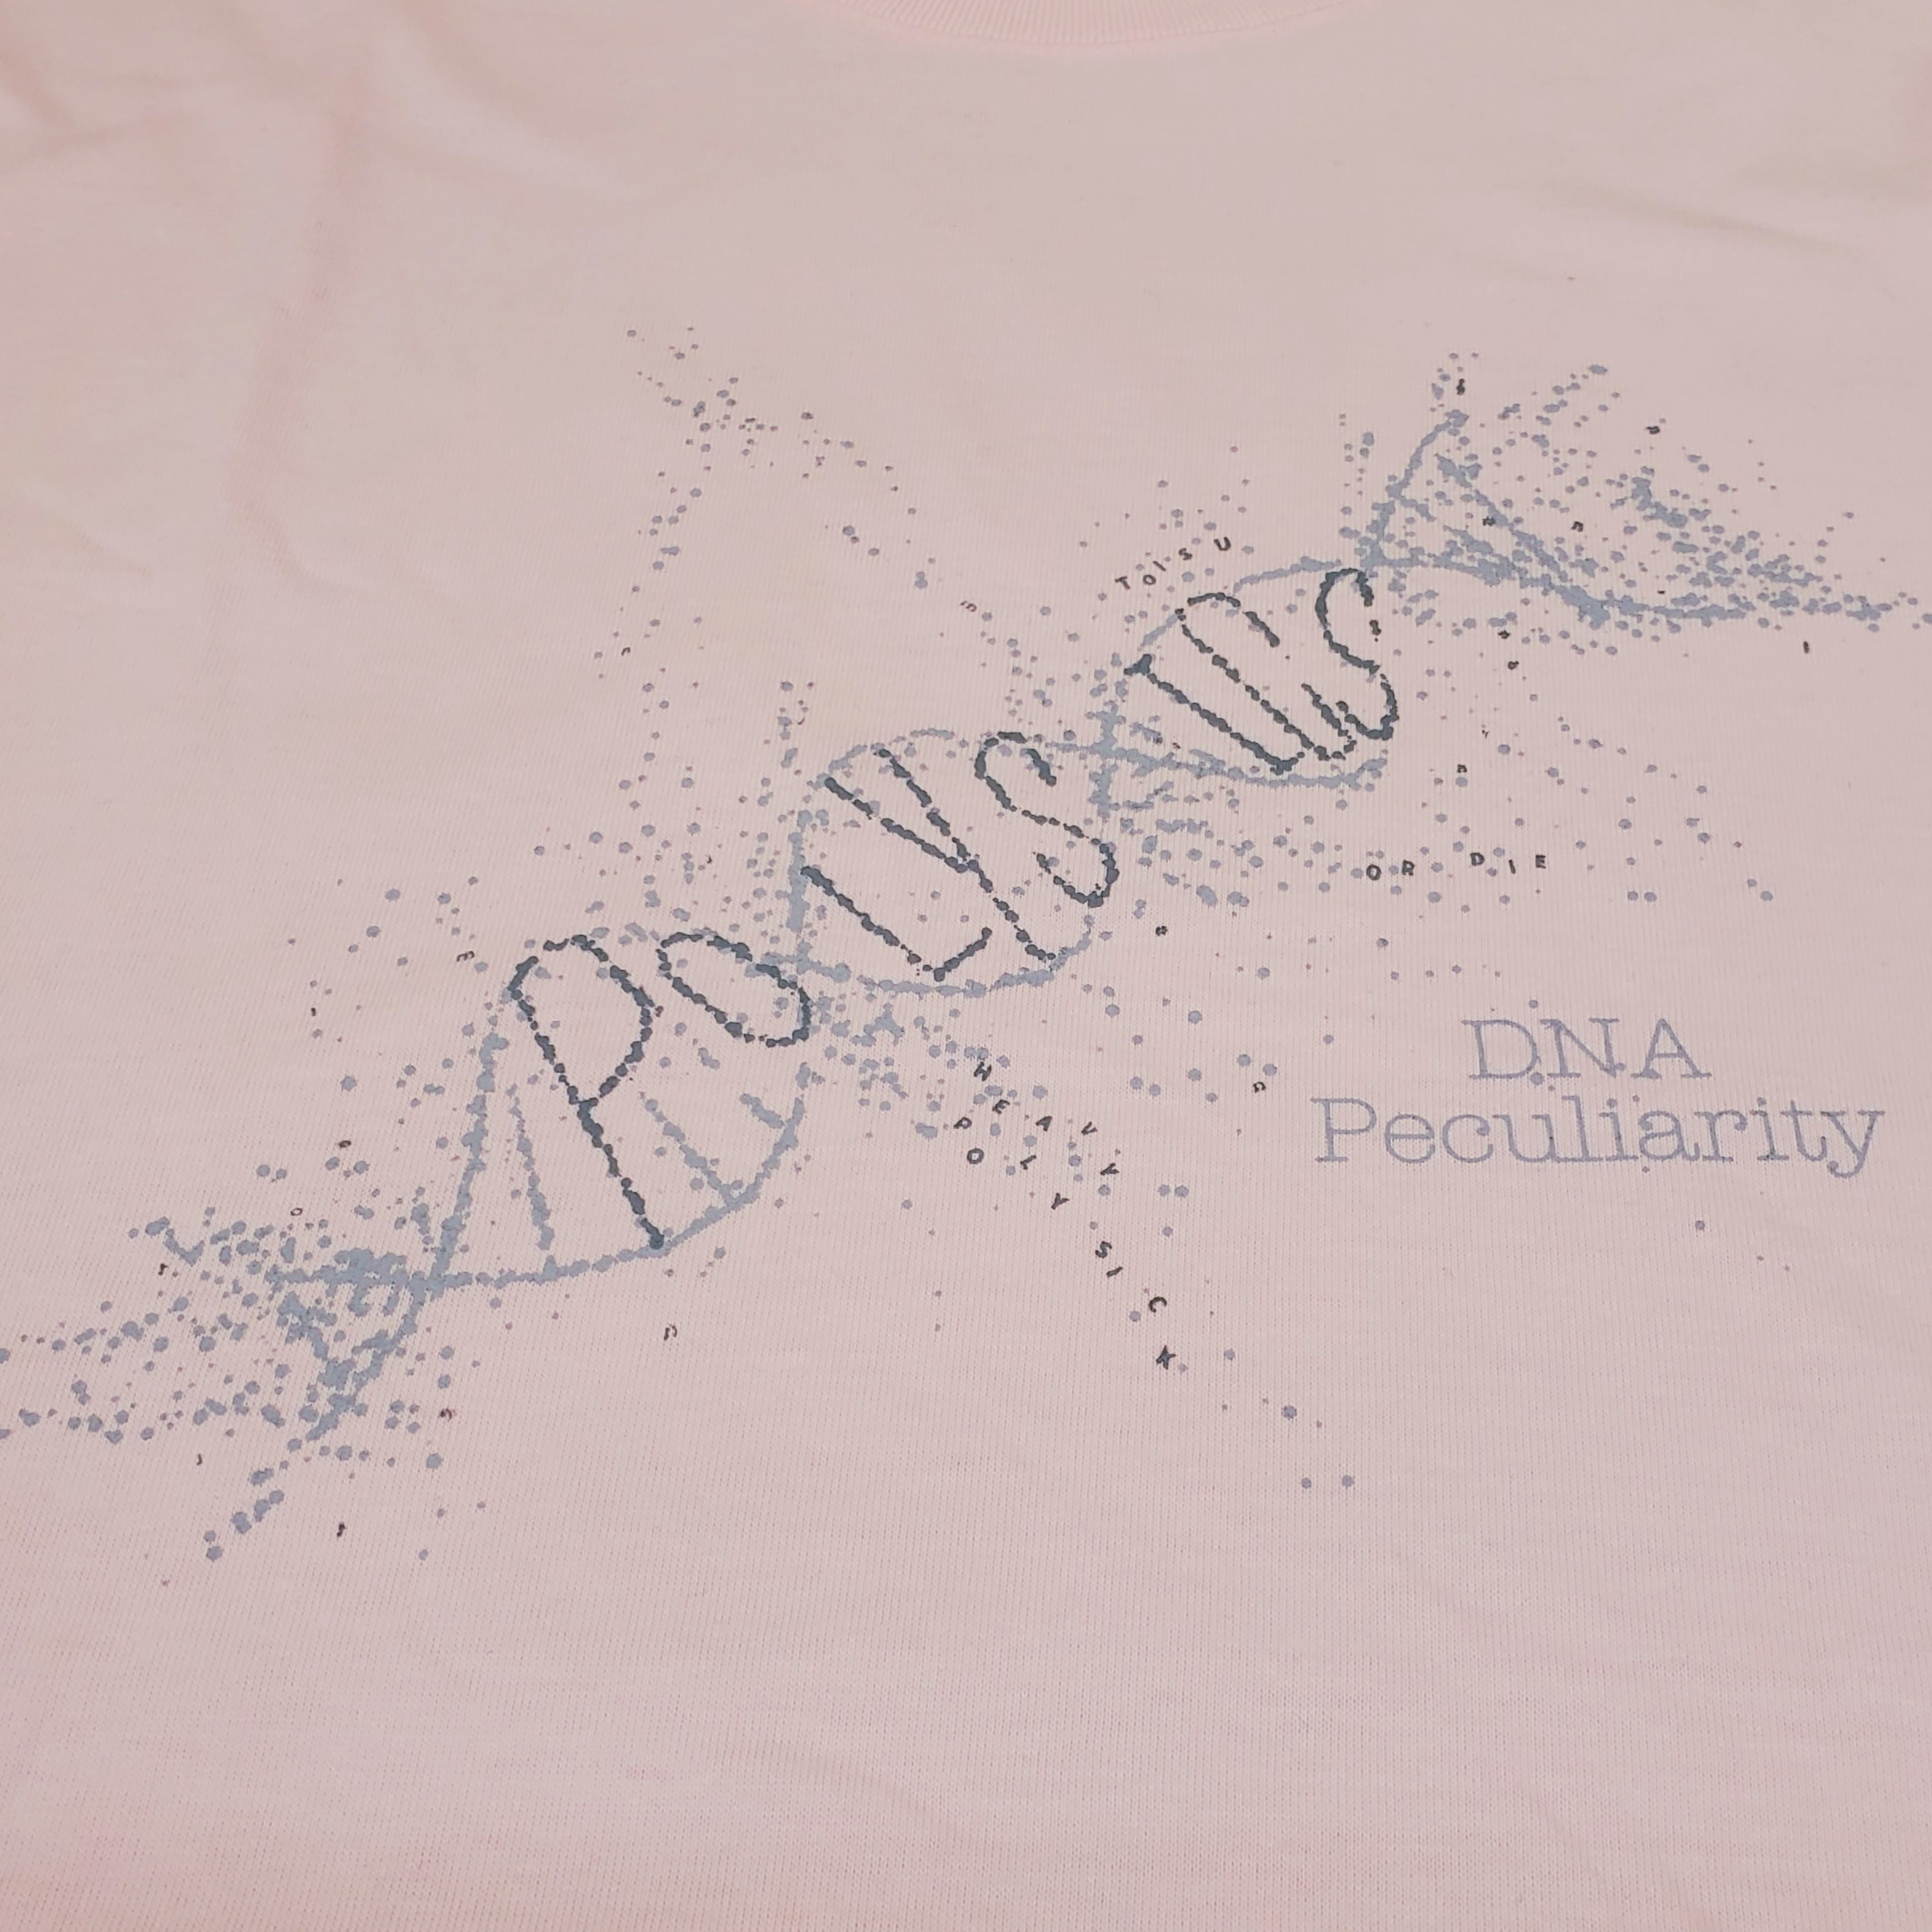 DNA Peculiarity Tシャツ（ベビーピンク）